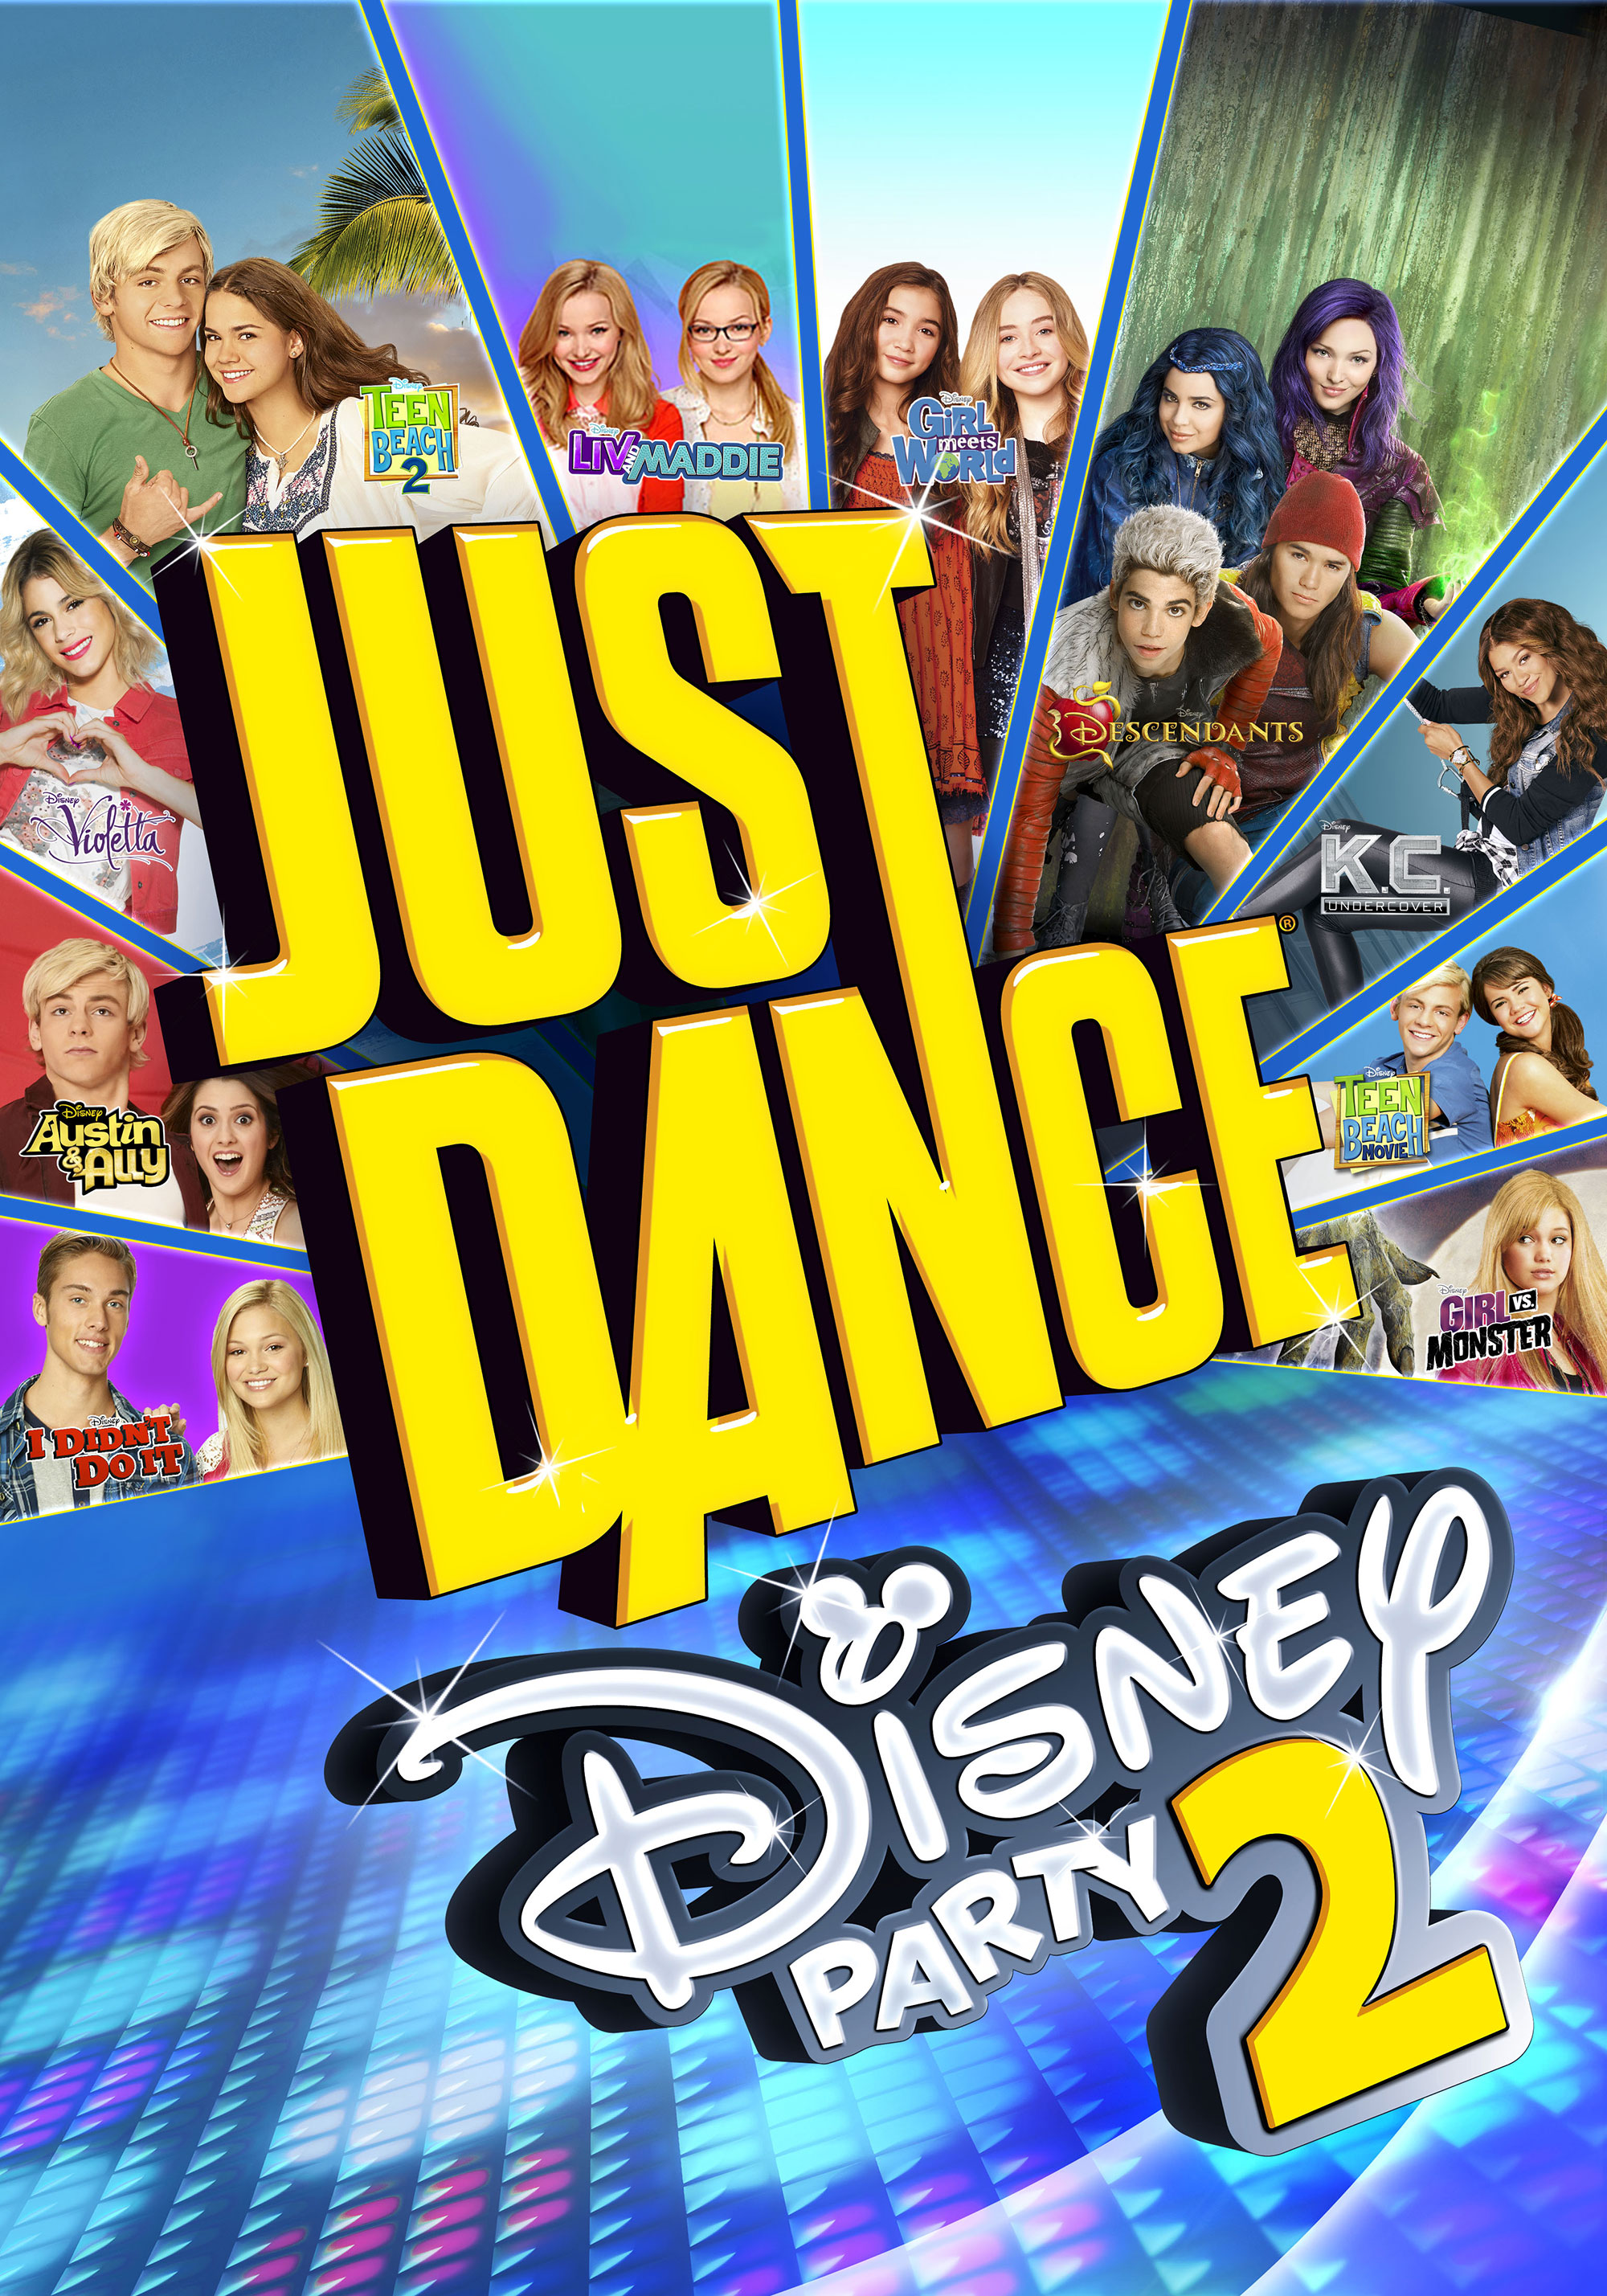 Annunciato Just Dance: Disney Party 2